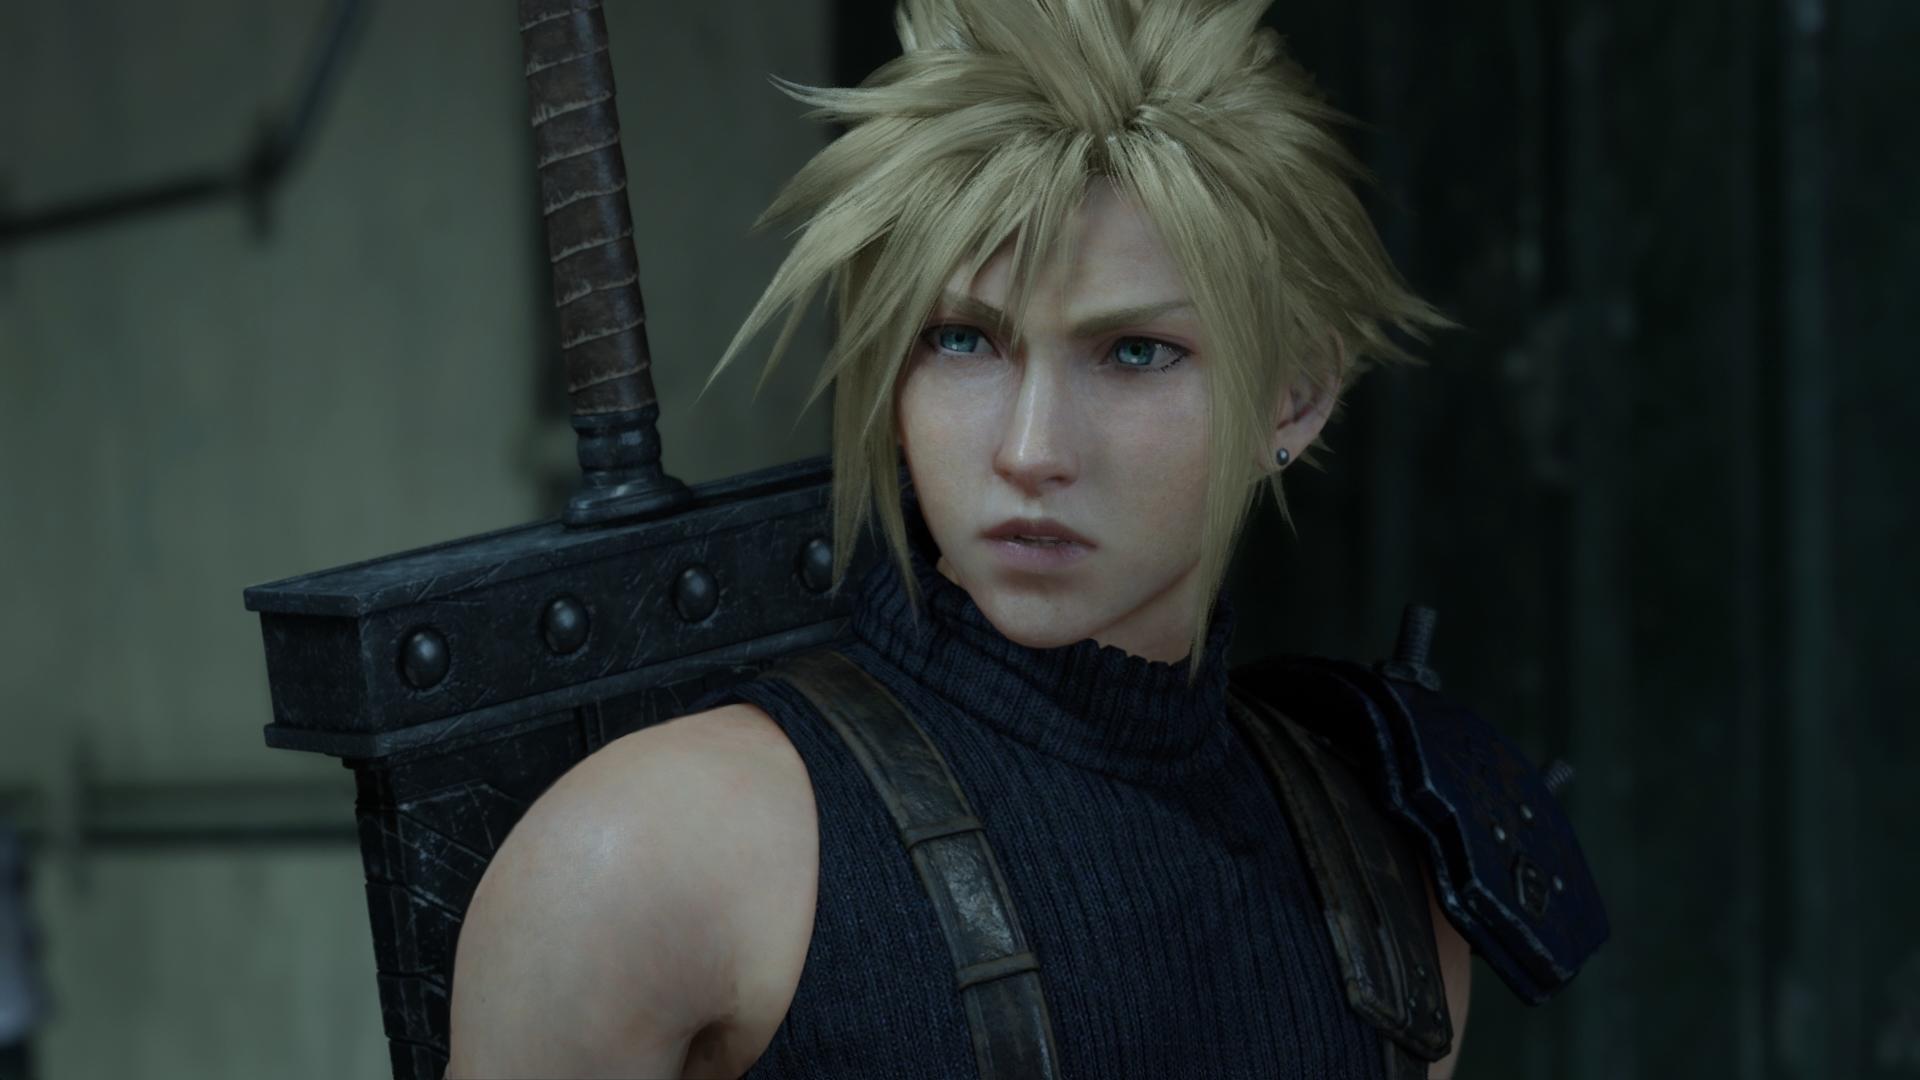 Final Fantasy 7 Remake's Release Date, Gameplay, Demo, Differences